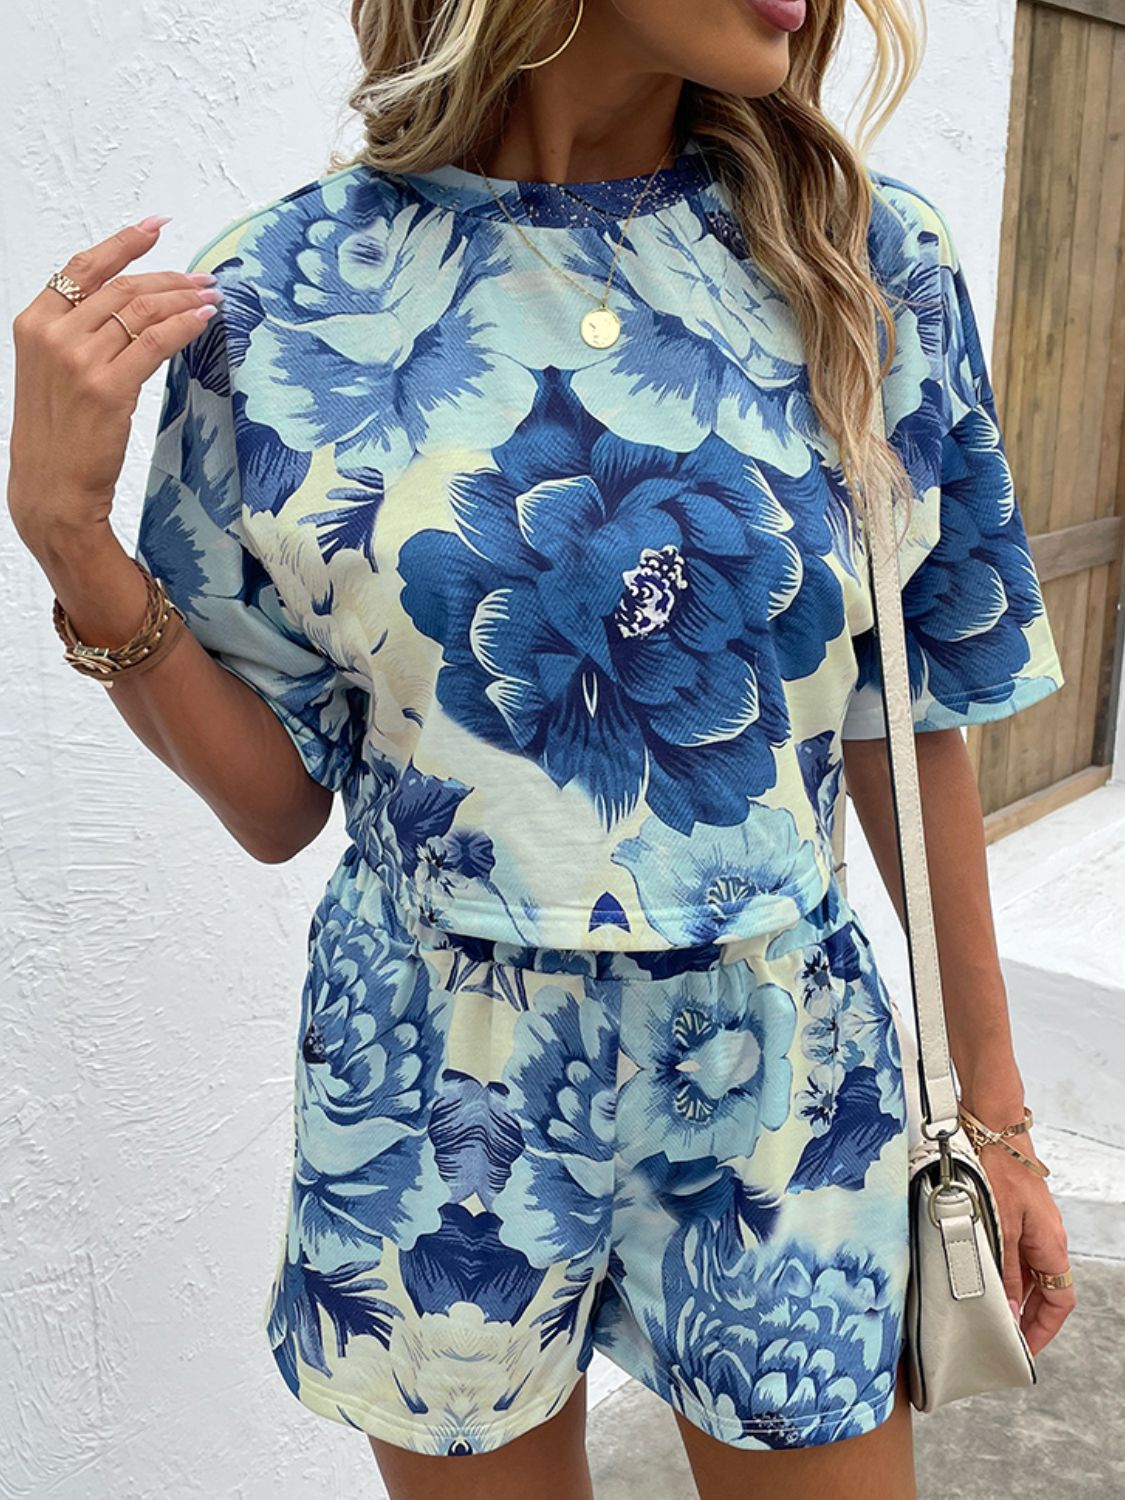 Floral Print Round Neck Dropped Shoulder Half Sleeve Top and Shorts Set Print on any thing USA/STOD clothes